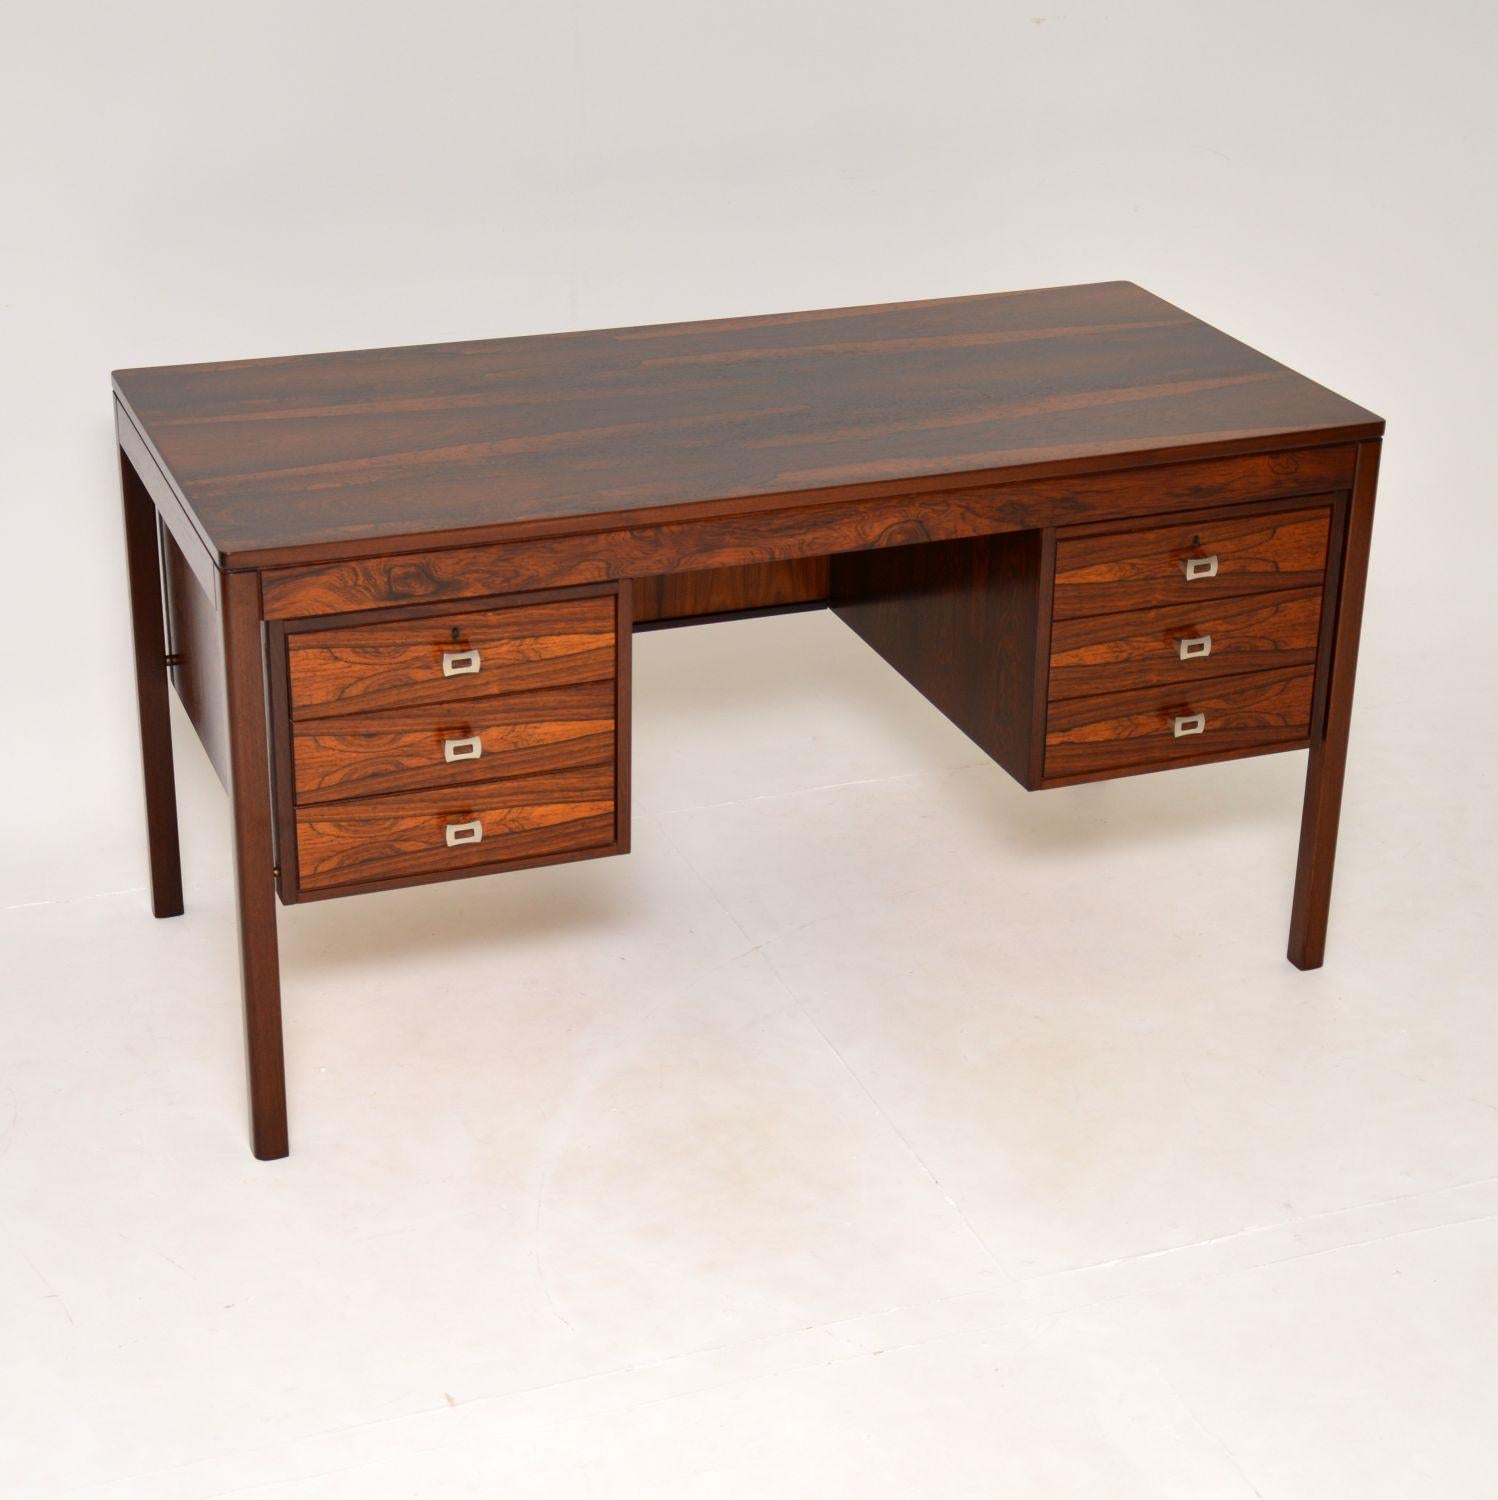 A stunning vintage Scandinavian designer desk, beautifully made from wood. This was designed by Torbjorn Afdal for Bruksbo, it was made in Norway and dates from the 1960’s.

The wood grain patterns are incredible on every part of this, and it has